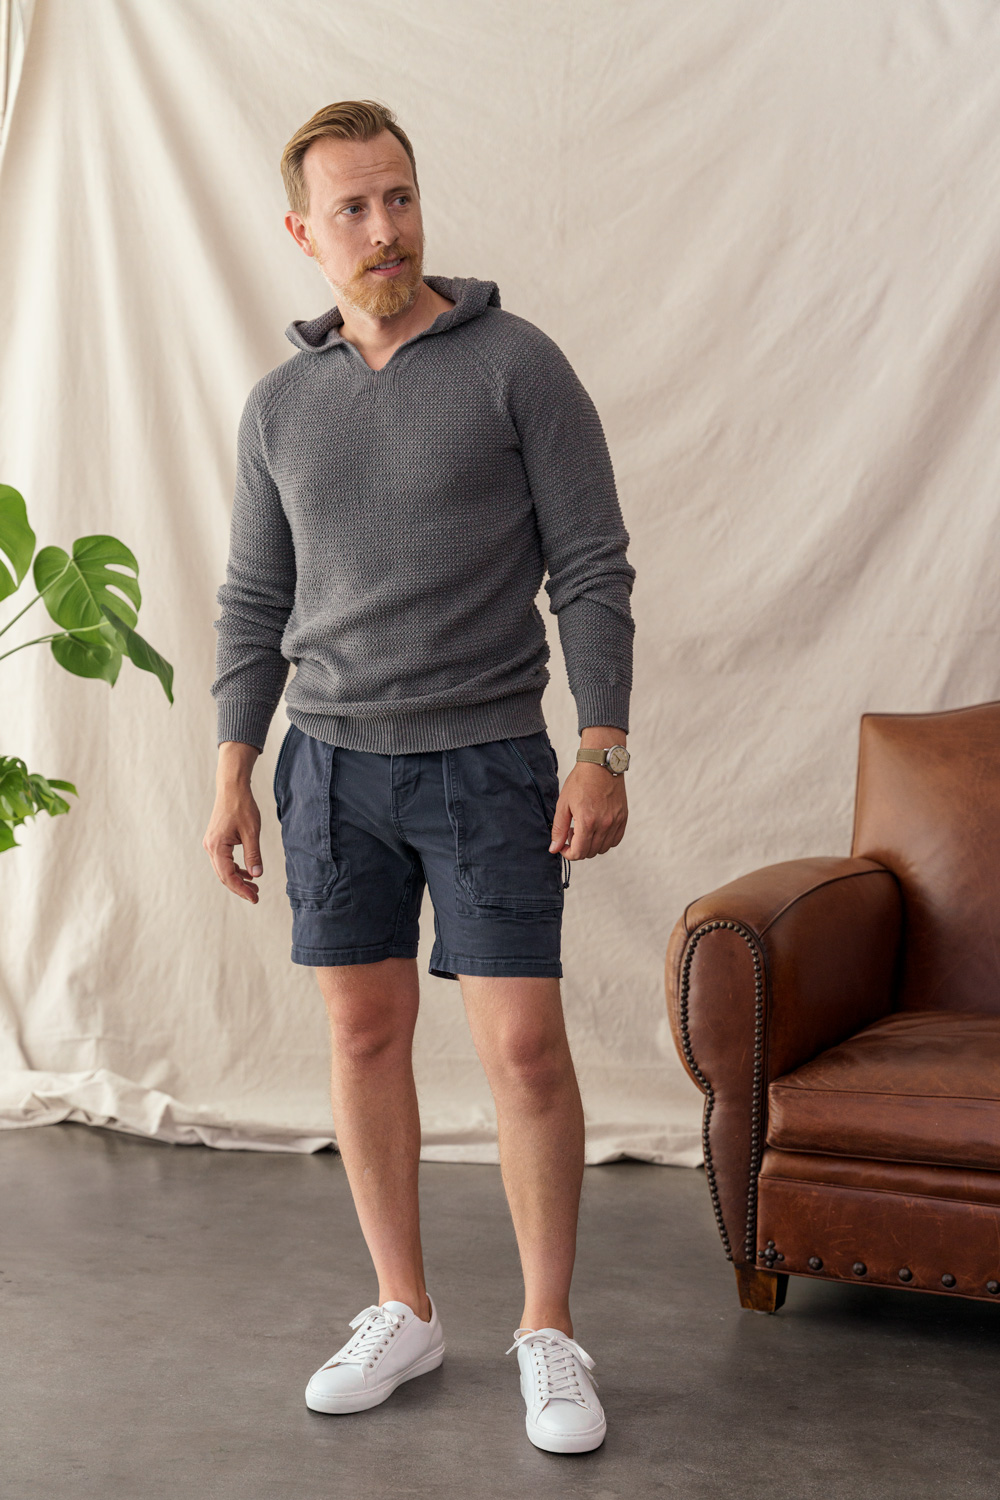 men's summer outfit with knit sweater hoodie, navy shorts, and white sneakers